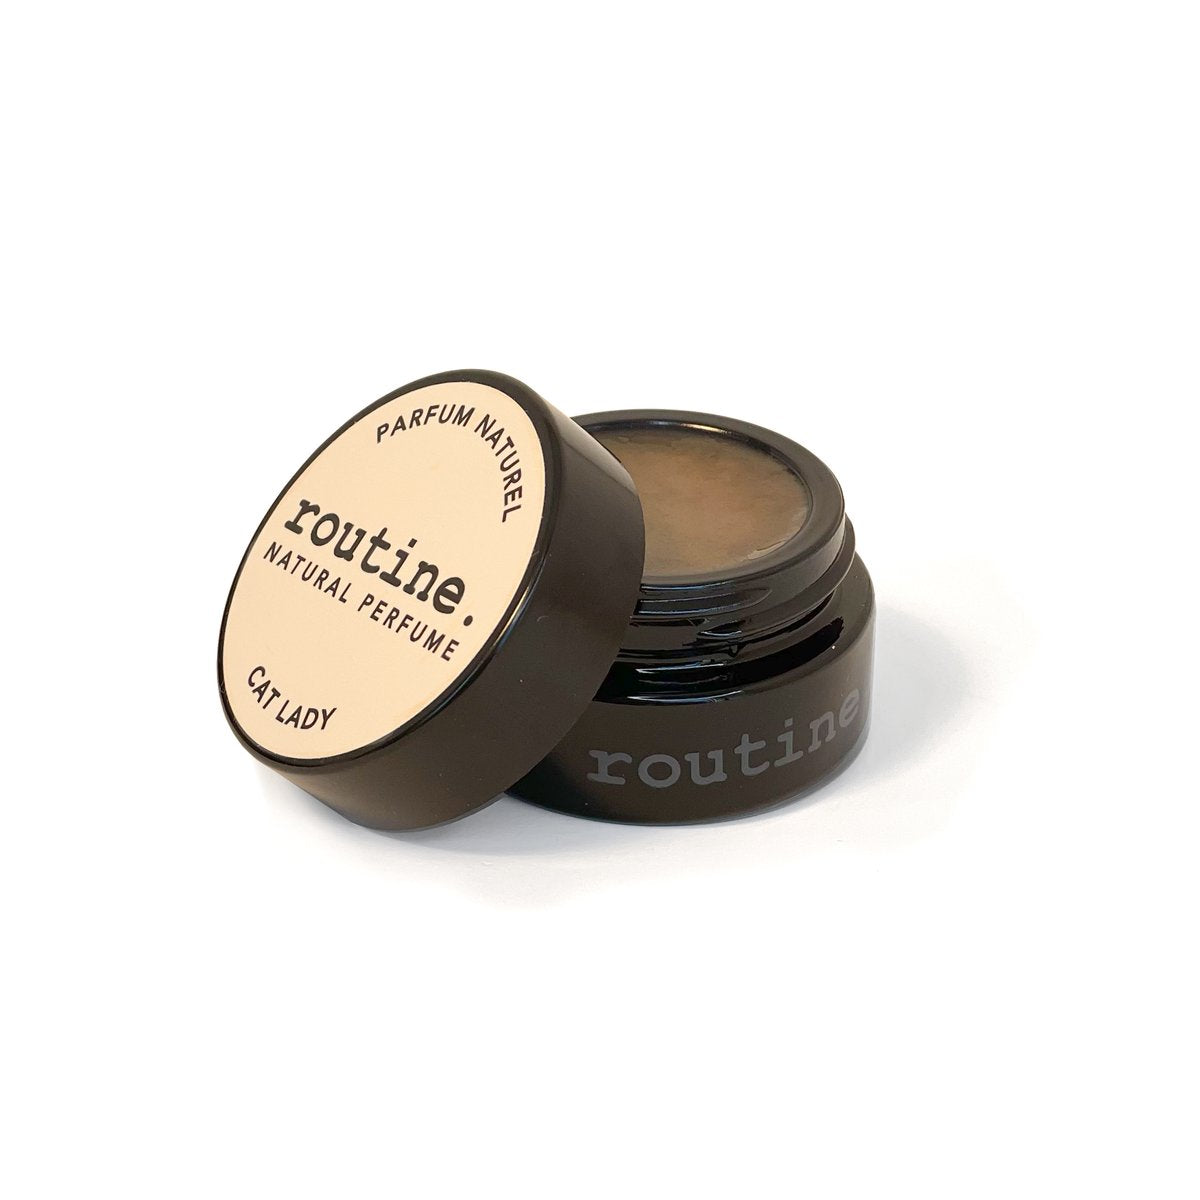 CAT LADY SOLID PERFUME - 15G